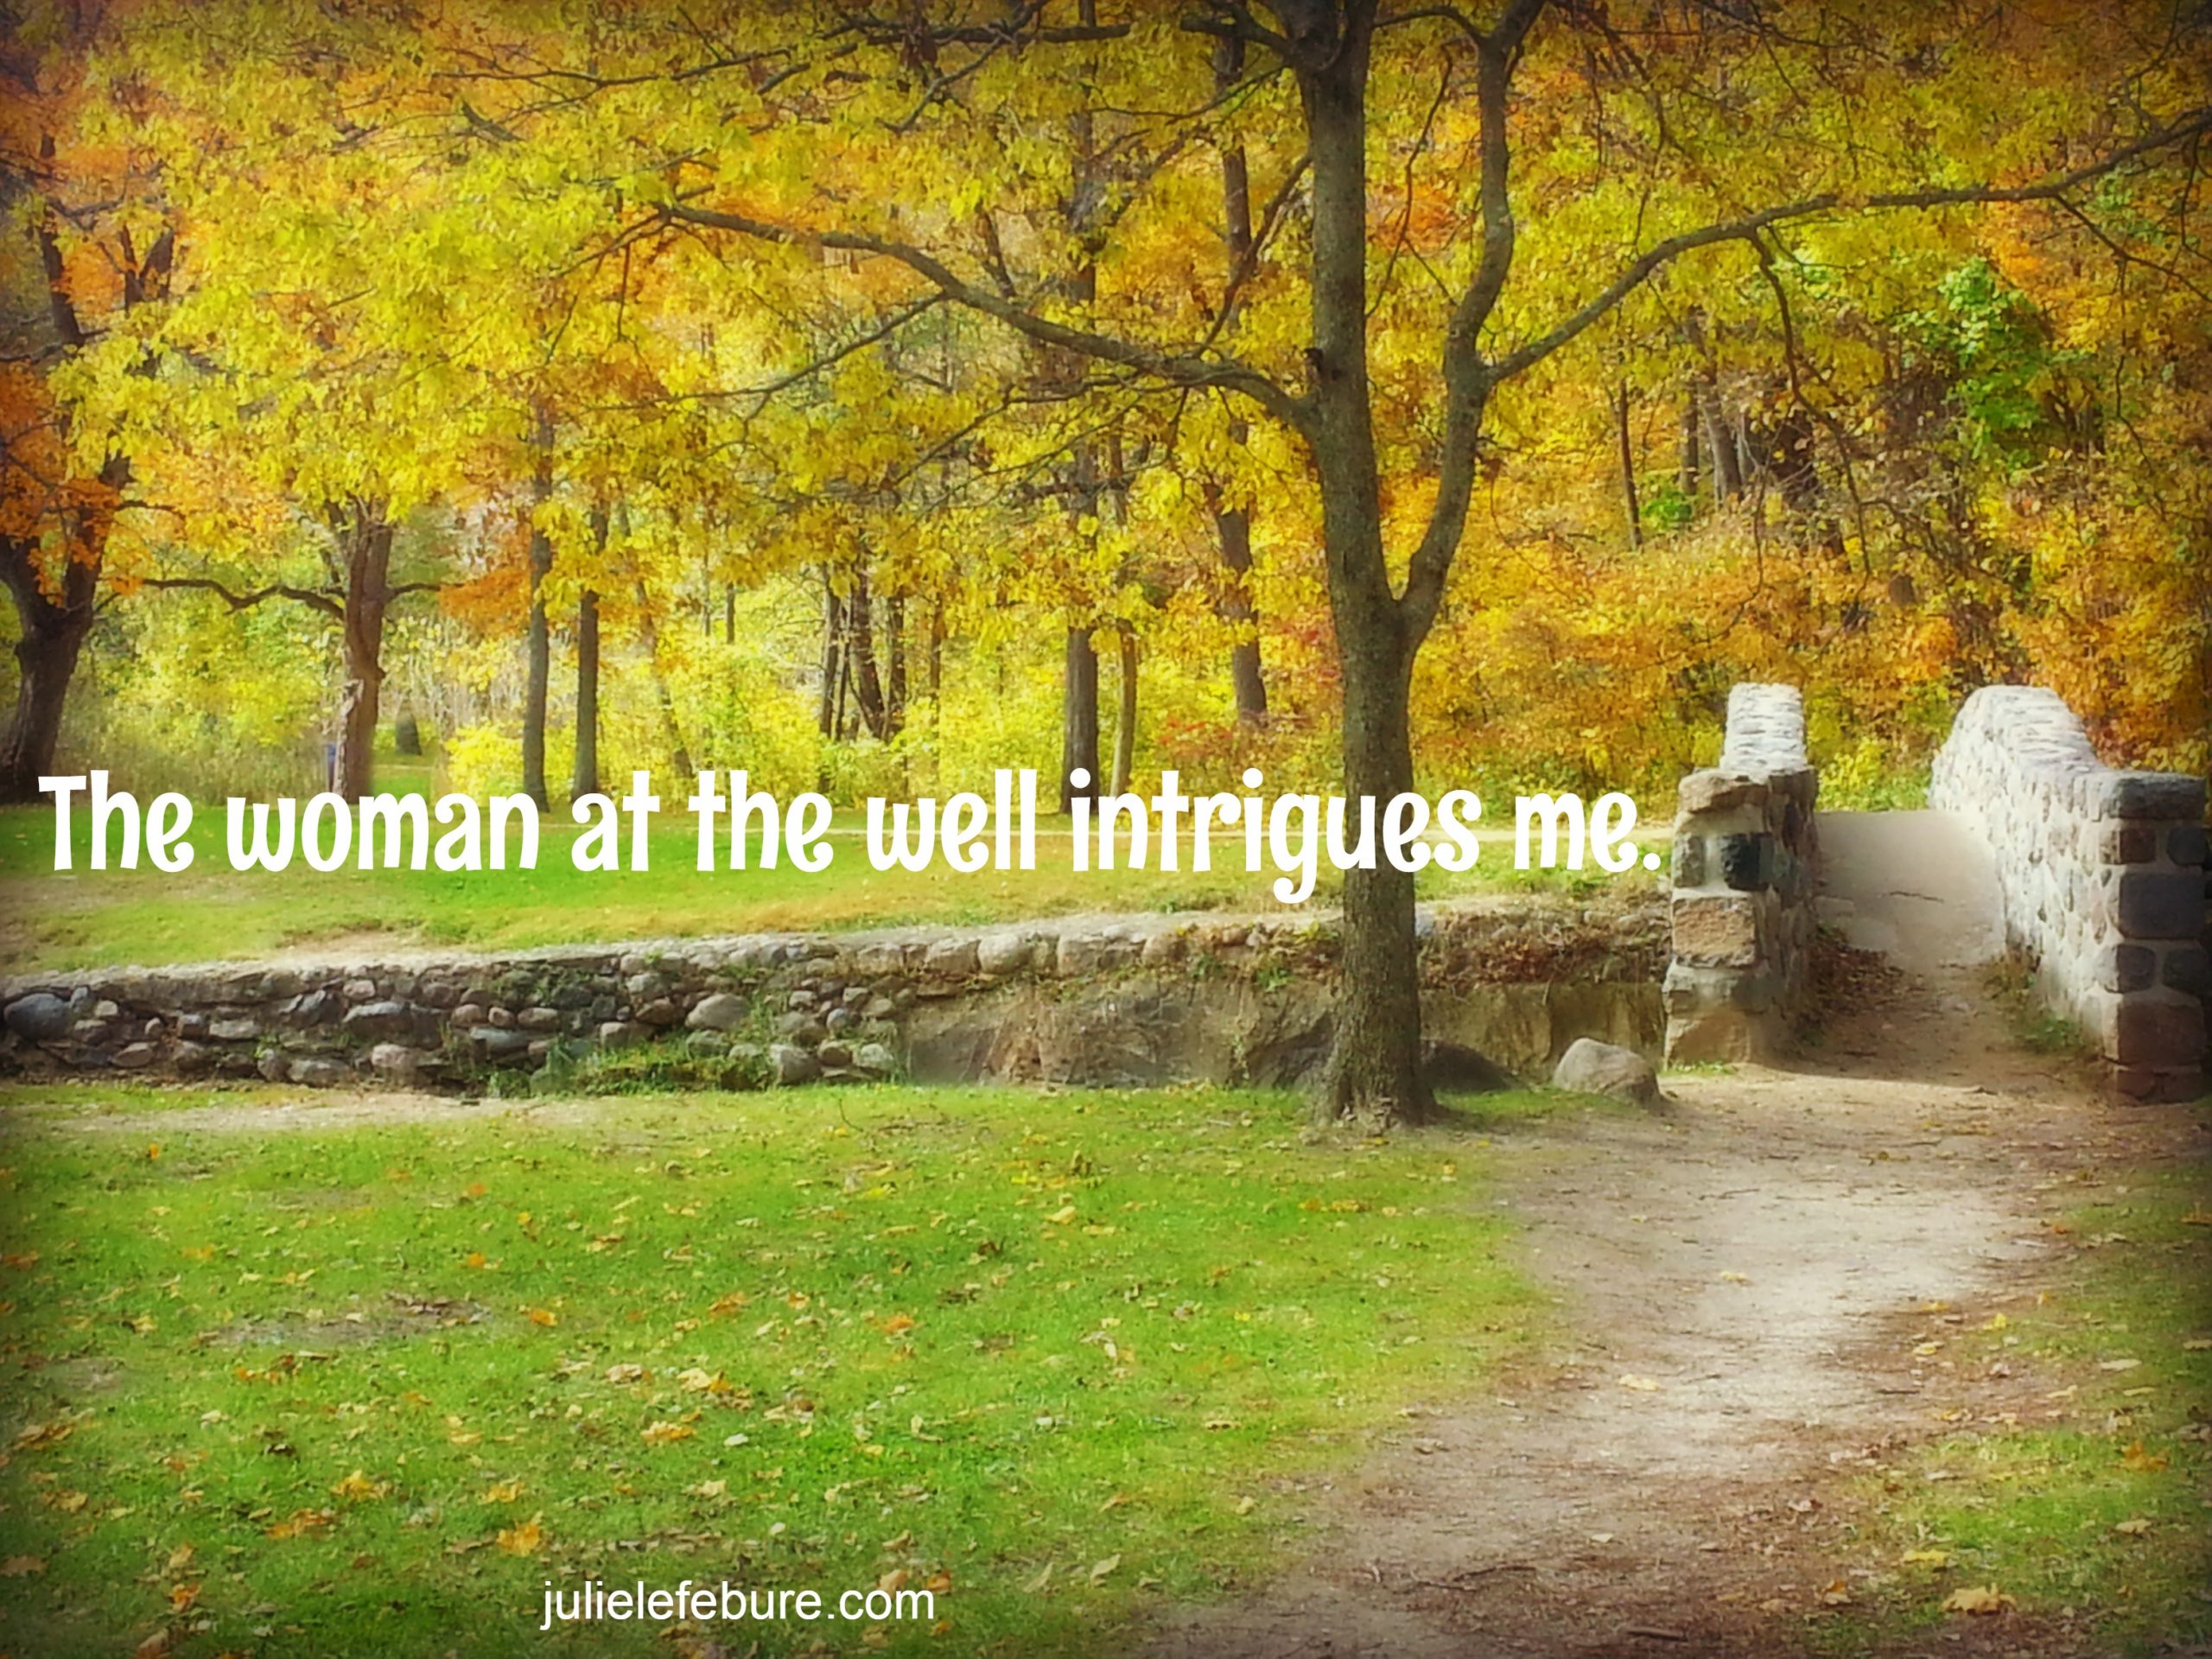 I Want To Be More Like The Woman At The Well